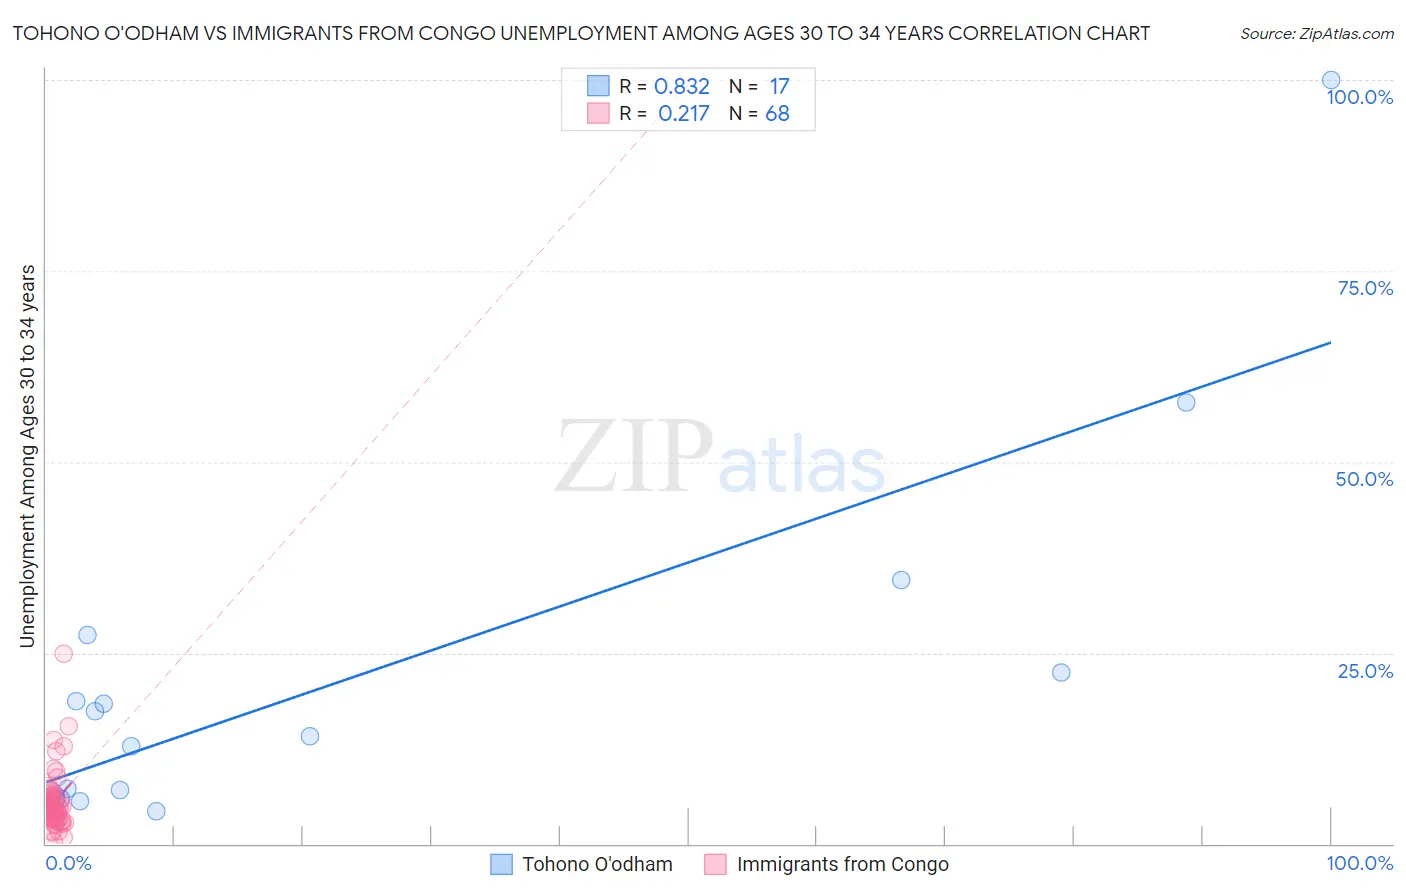 Tohono O'odham vs Immigrants from Congo Unemployment Among Ages 30 to 34 years